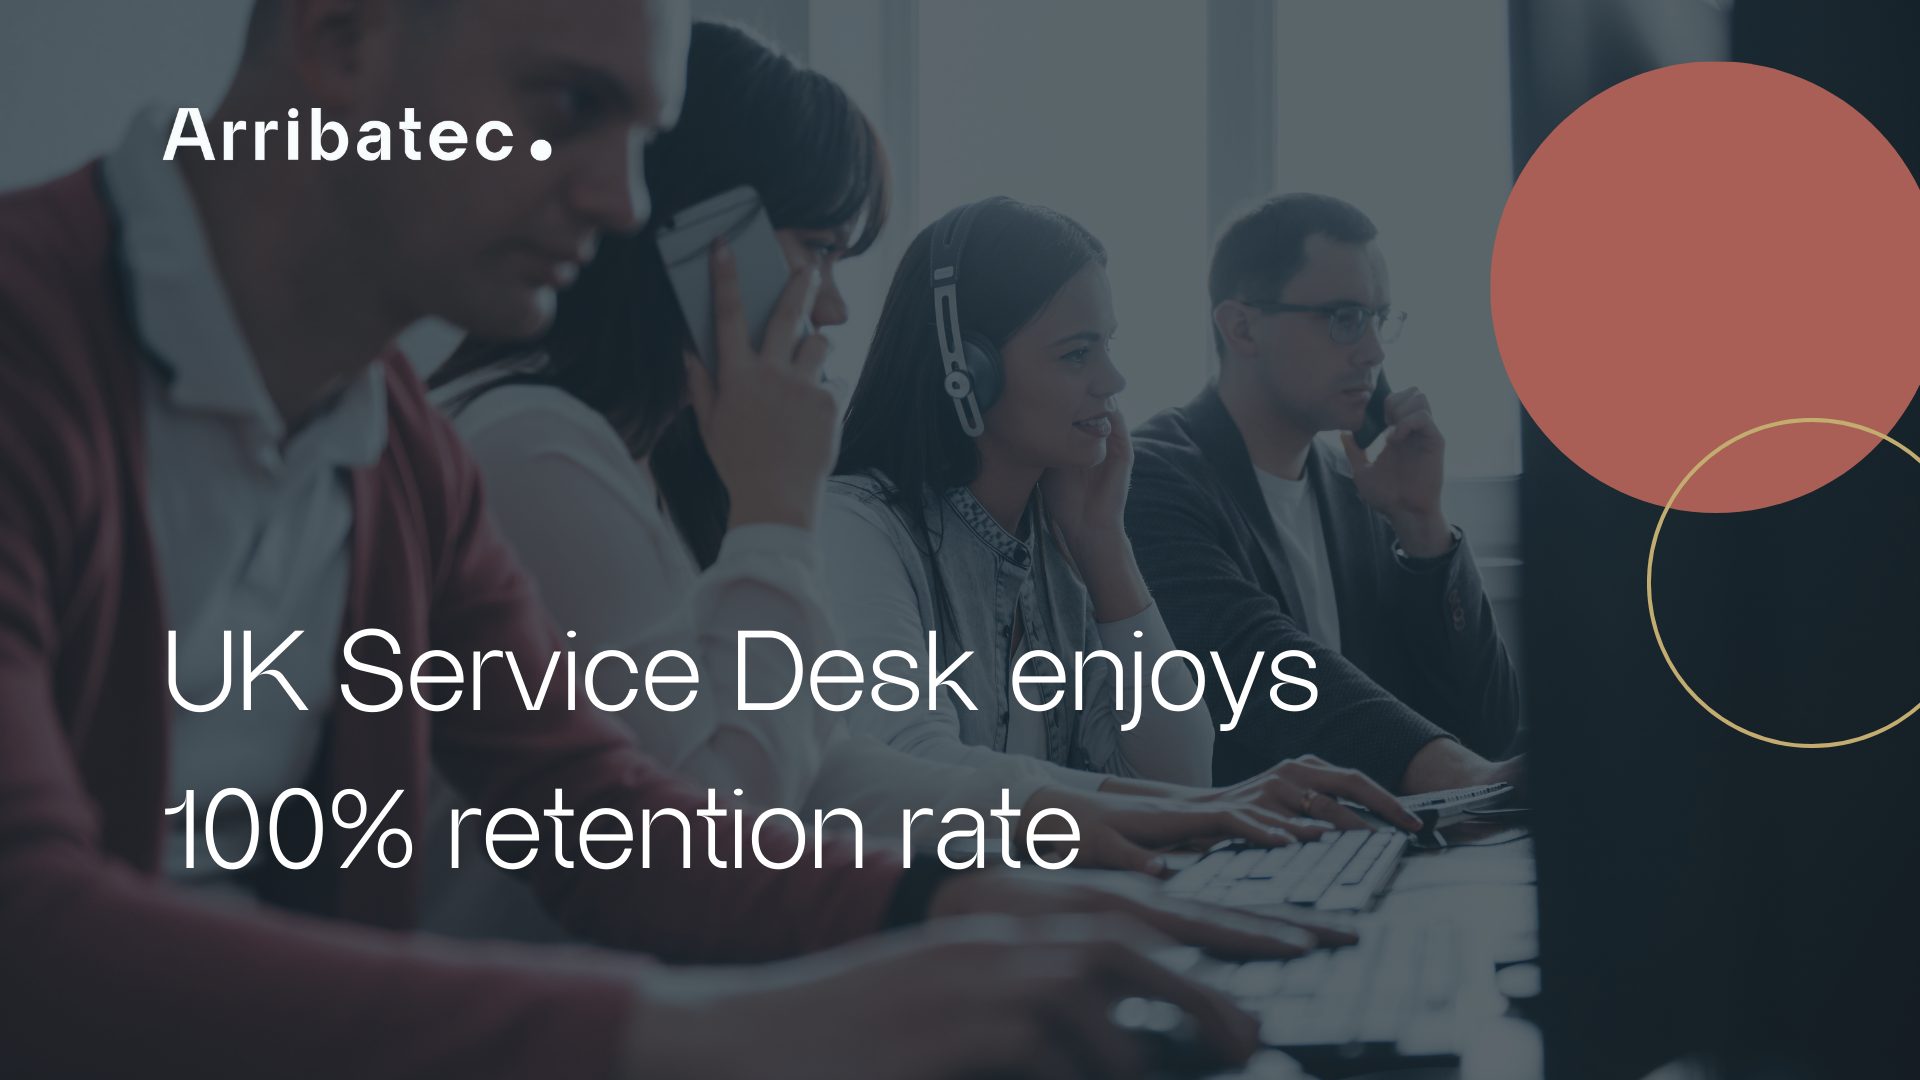 Arribatec’s UK Service Desk: Setting the Standard for Client Retention and Growth